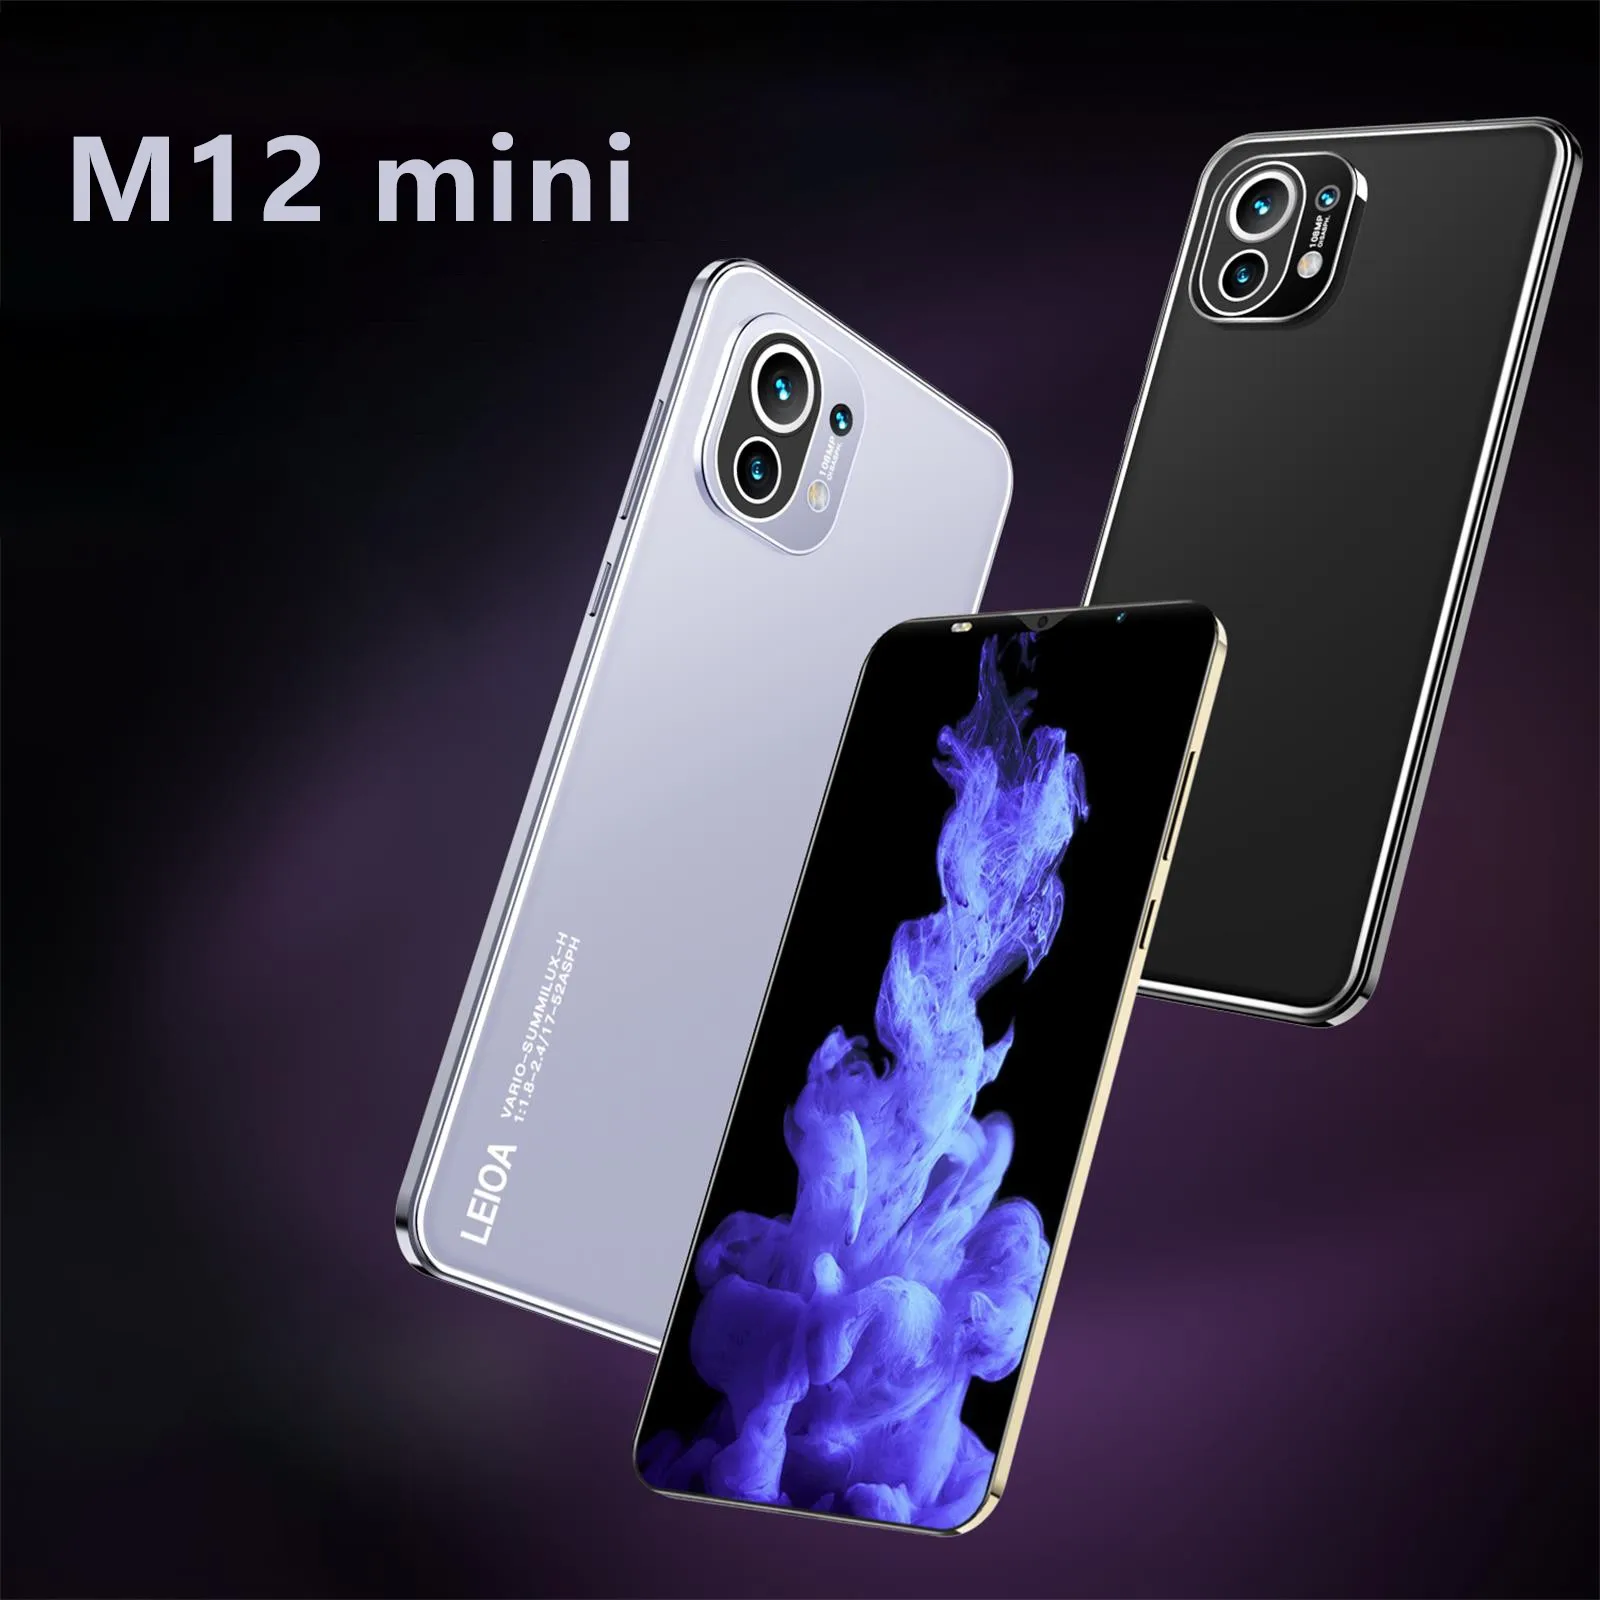 2021 M12 Mini Smartphone Android 4.4 512 + 4GROM Smart Phone Face Unlock 5.2Inch Full Screen 2200Mah Cell Mobile Phone Telephone